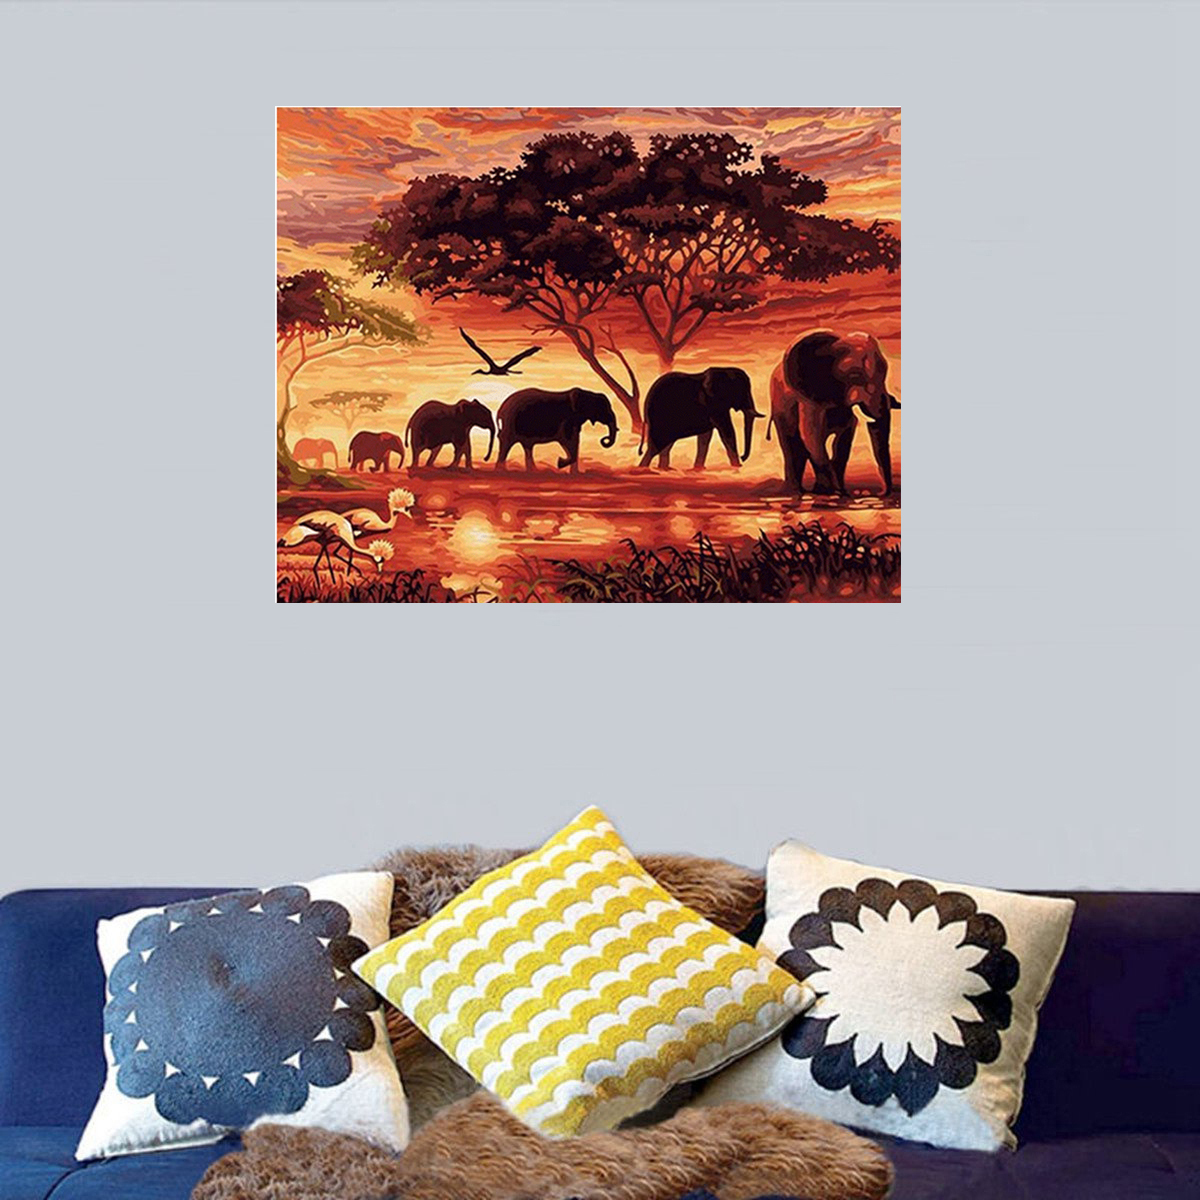 DIY-Diamond-Painting-Elephant-Scenery-Wall-Painting-Hanging-Pictures-Handmade-Wall-Decorations-Gifts-1744020-7